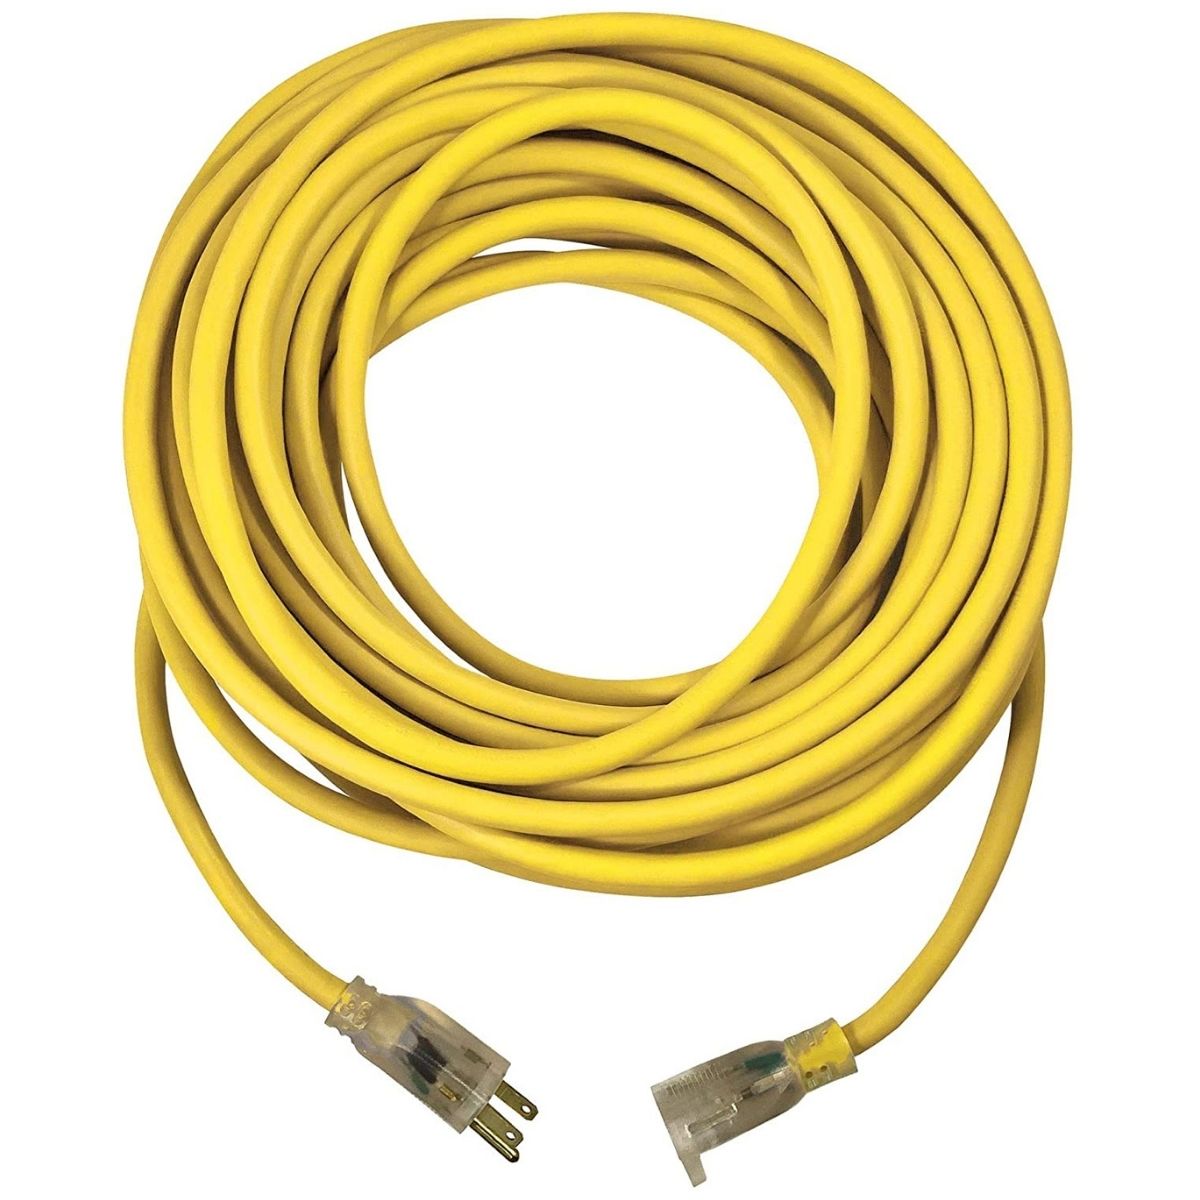 US Wire and Cable 50-Foot Lighted Extension Cord